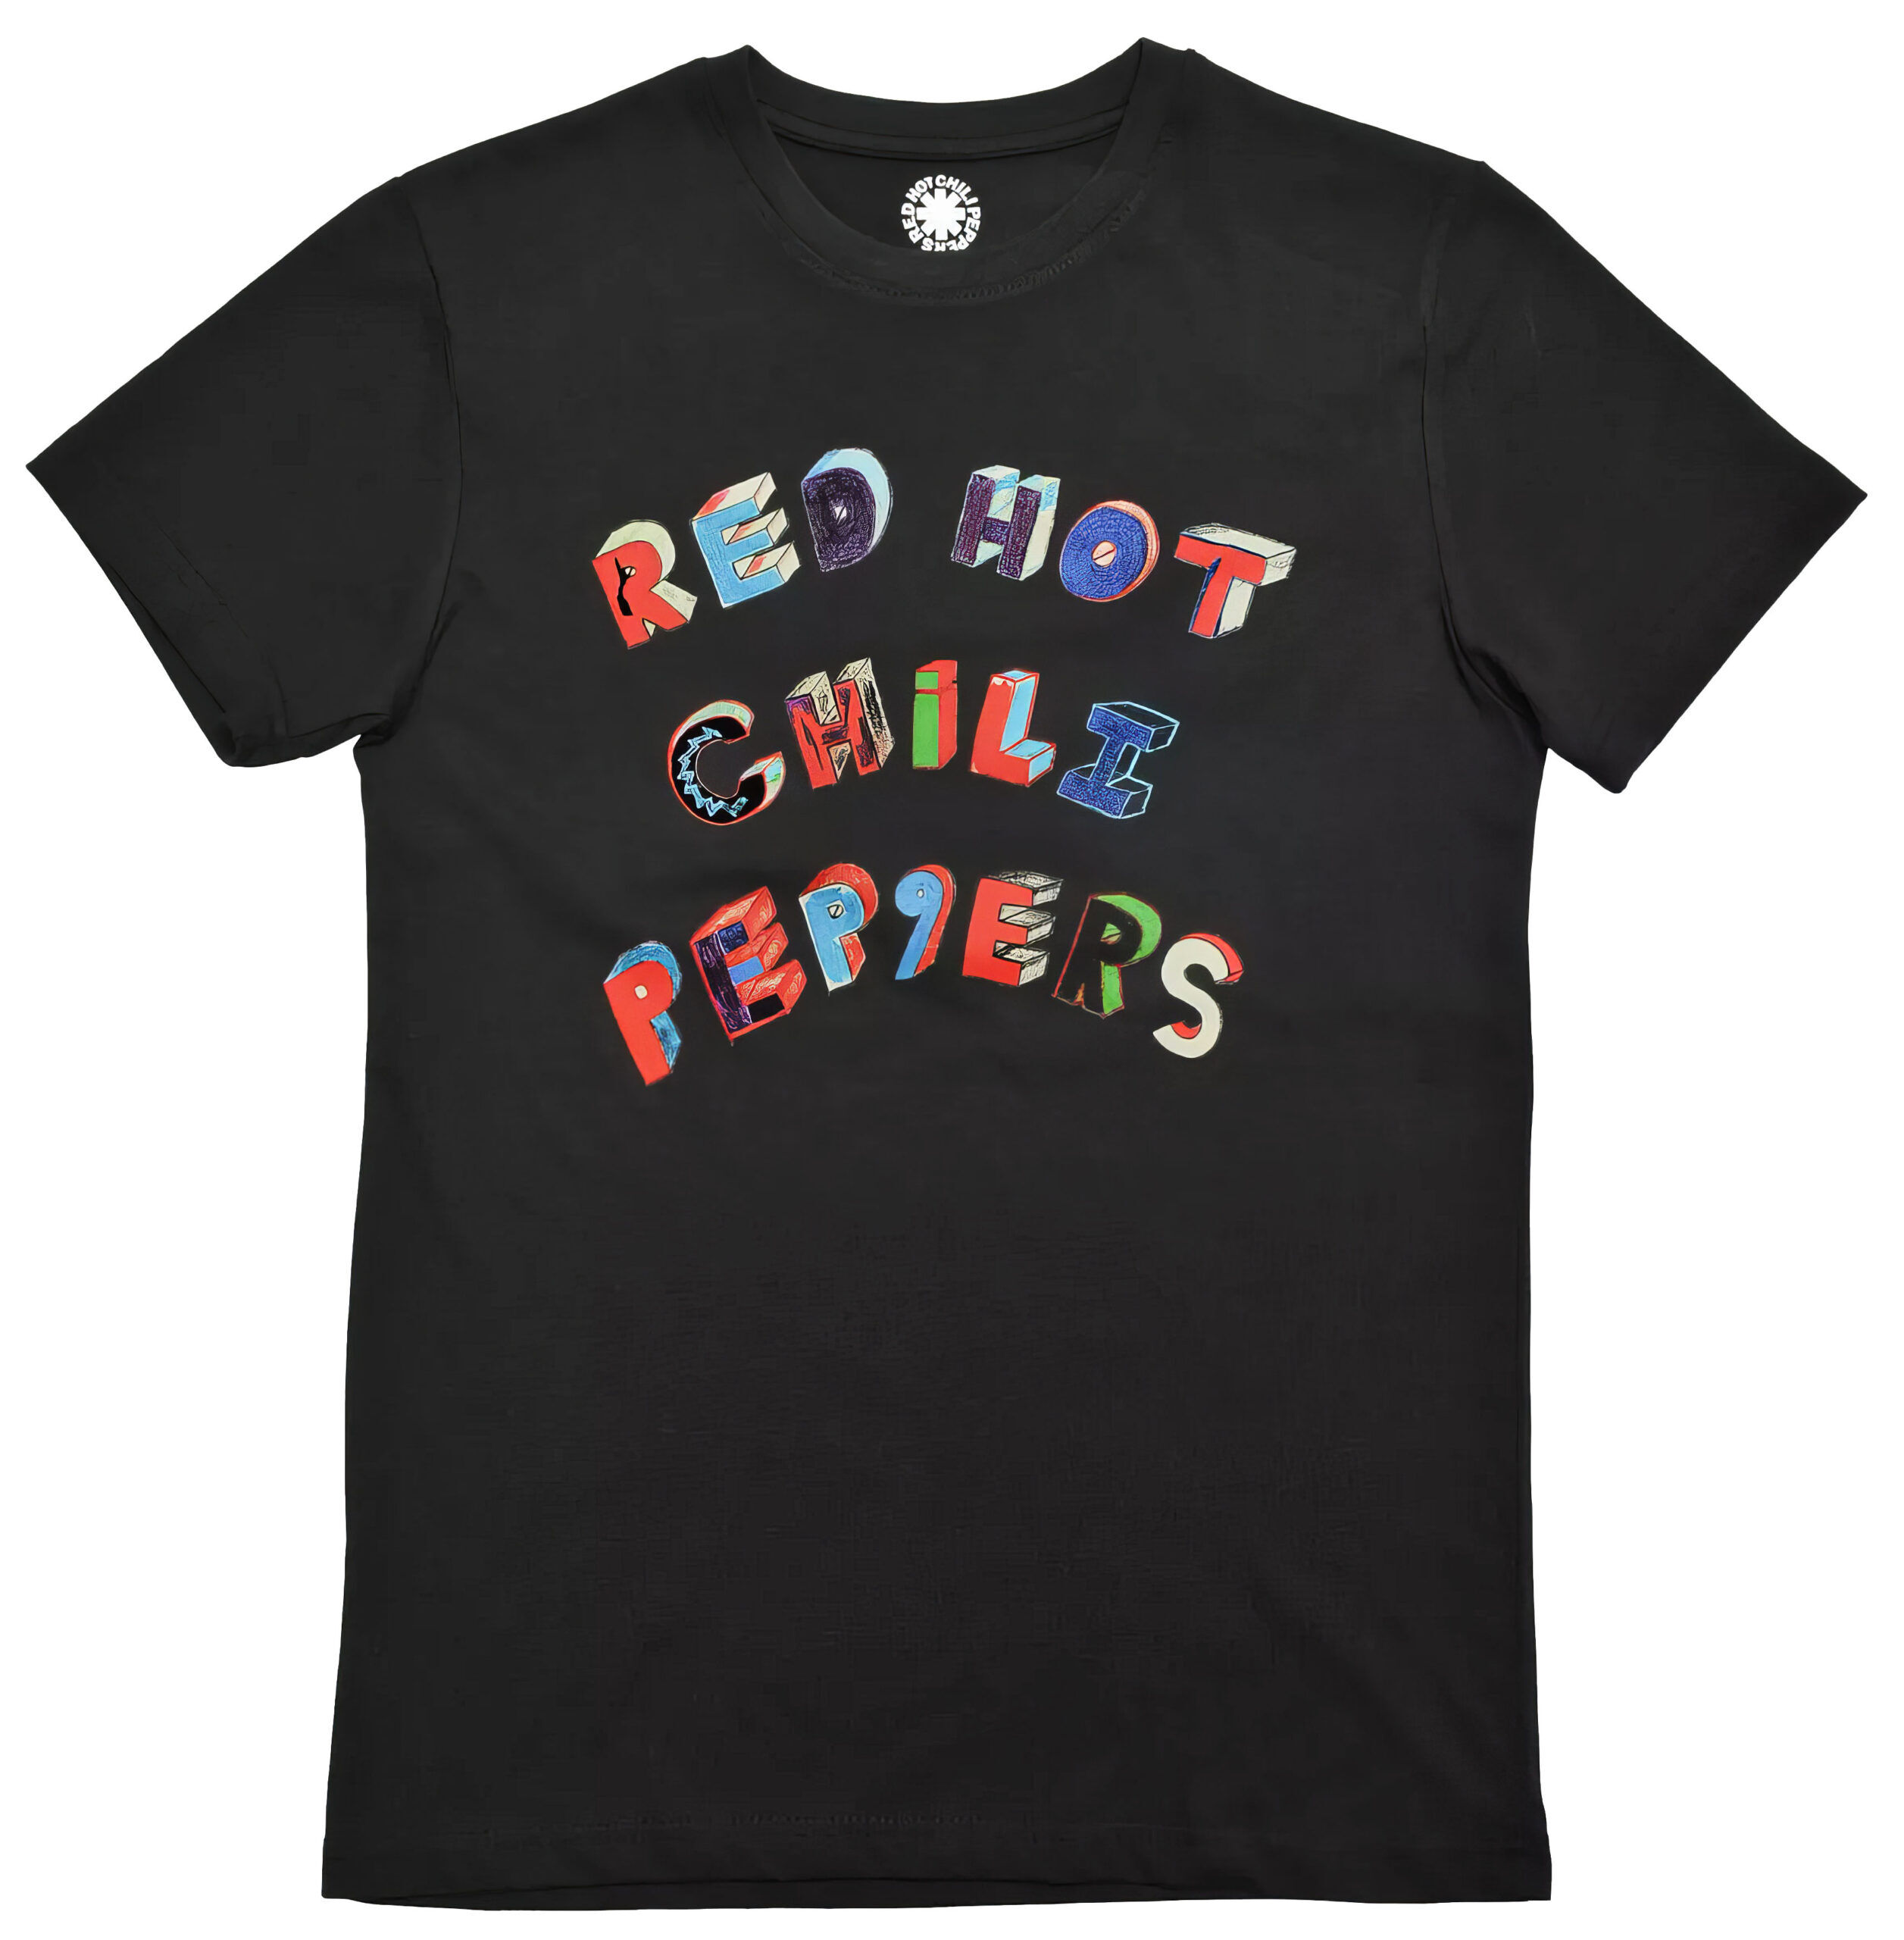 RED HOT CHILI PEPPERS Colorful Letters Black Tshirt